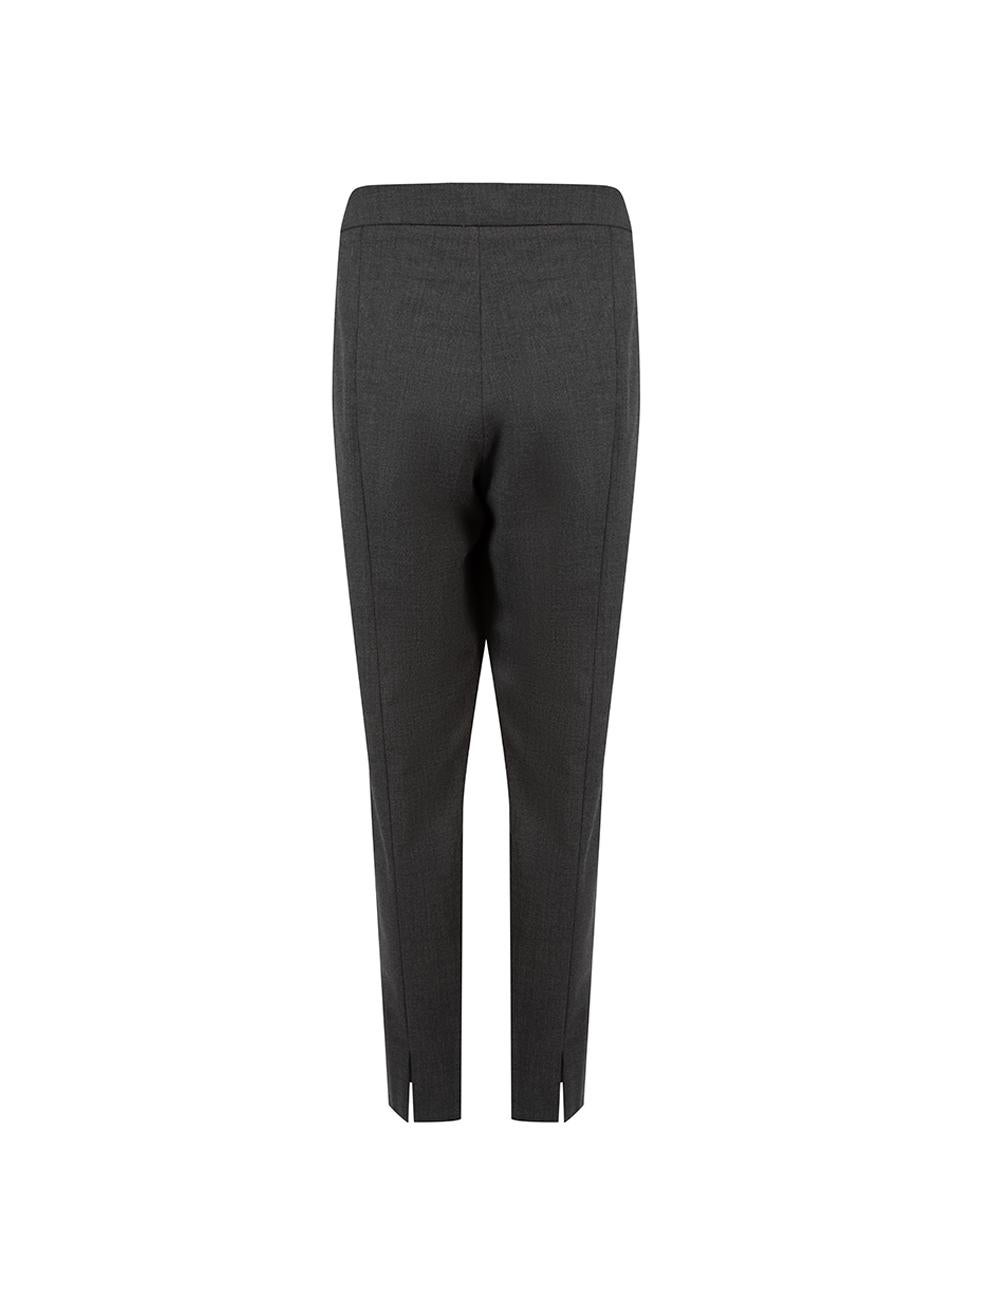 CONDITION is Very good. Hardly any visible wear to trousers is evident on this used Proenza Schouler designer resale item. Details Grey Wool Straight leg trousers Mid rise Slits on leg hem Side zip closure with hook and eye Made in Italy Composition